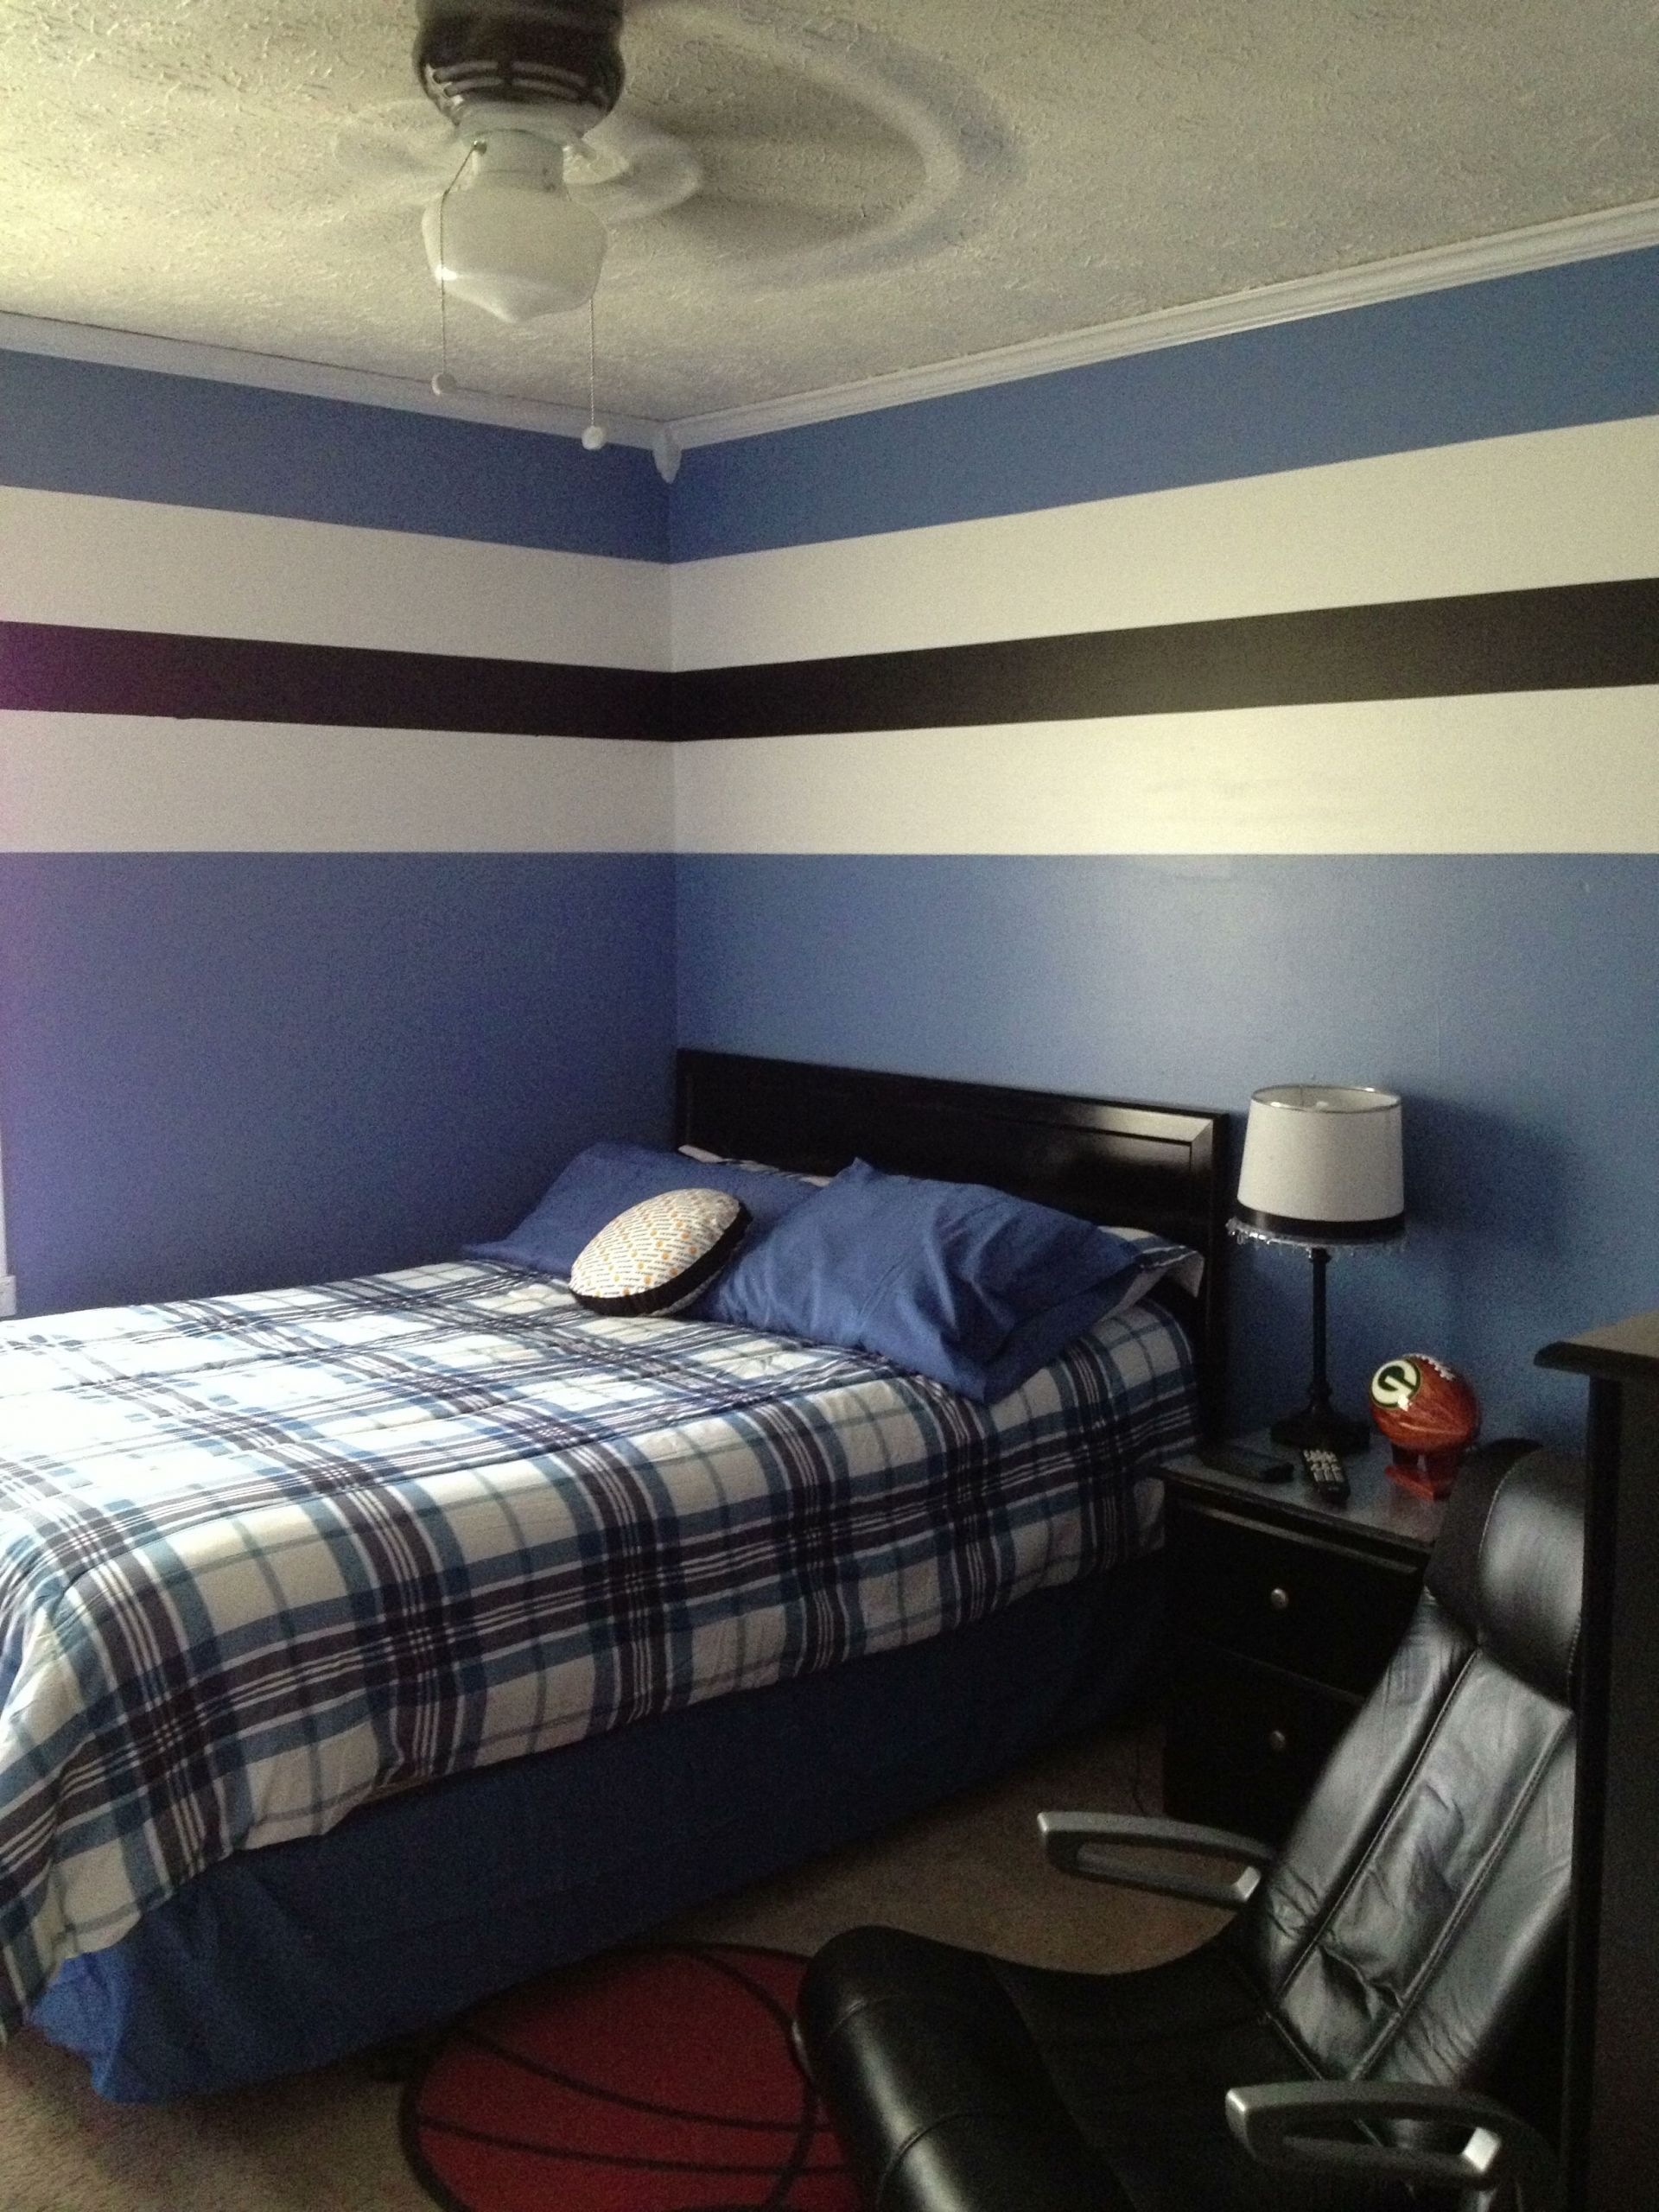 Painting Ideas For Boy Bedroom
 Teen boy bedroom make over Son s room